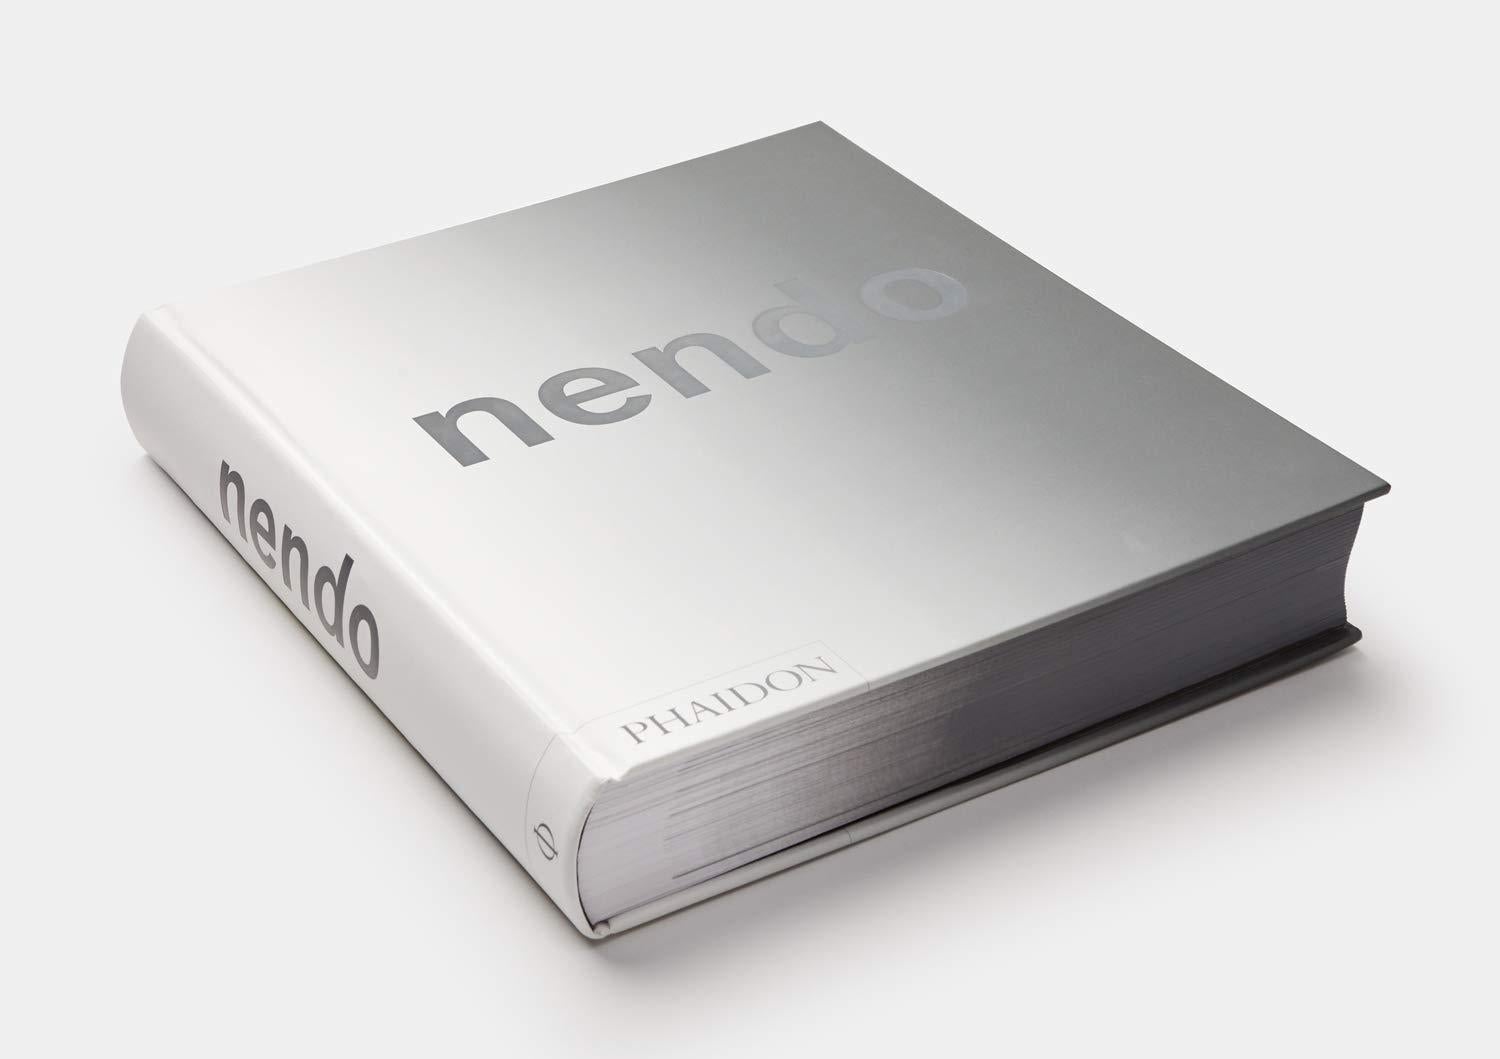 nendo by nendo (Hardcover)
In stock in Los Angeles

The ultimate monograph on one of the world's most creative, prolific, and legendary multidisciplinary design studios

nendo's extensive, idiosyncratic body of work flows seamlessly across